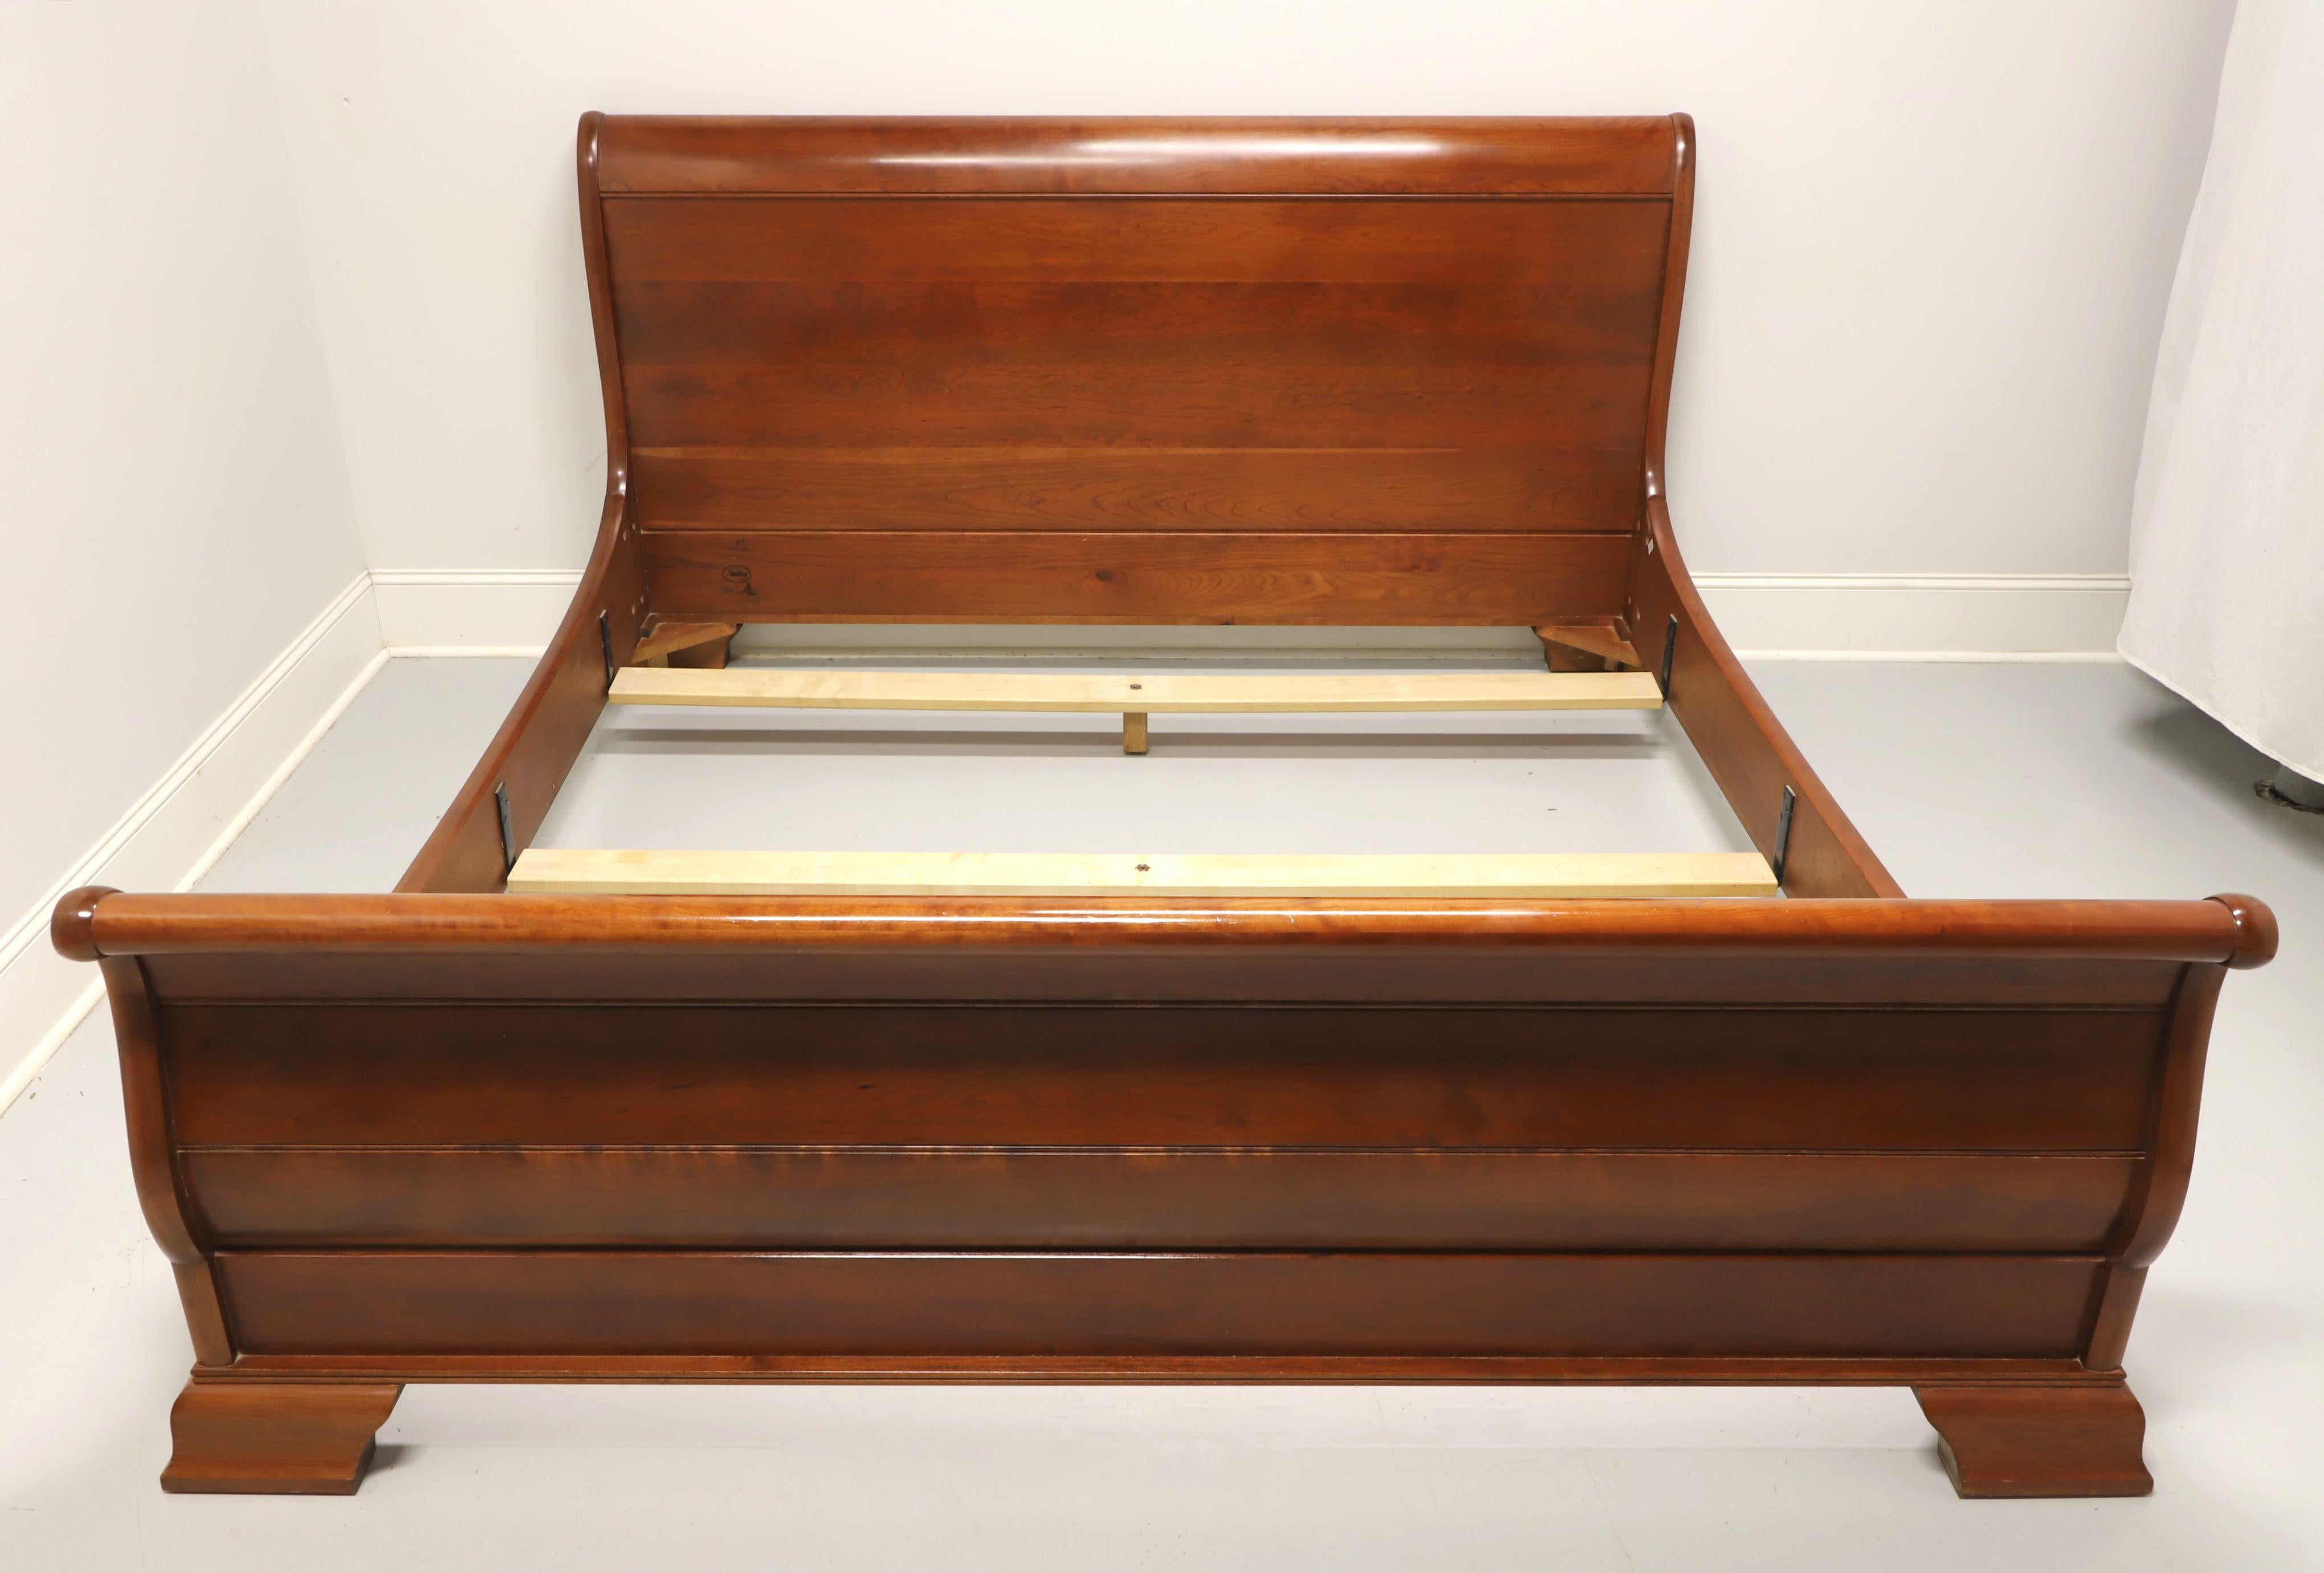 An American Empire style king size sleigh bed by Stickley Furniture. Solid cherry headboard, footboard, and bolt held side rails. Includes three center supported slats for mattress support. Made in the USA, circa 2001.

Style #: 3037L

Measures: